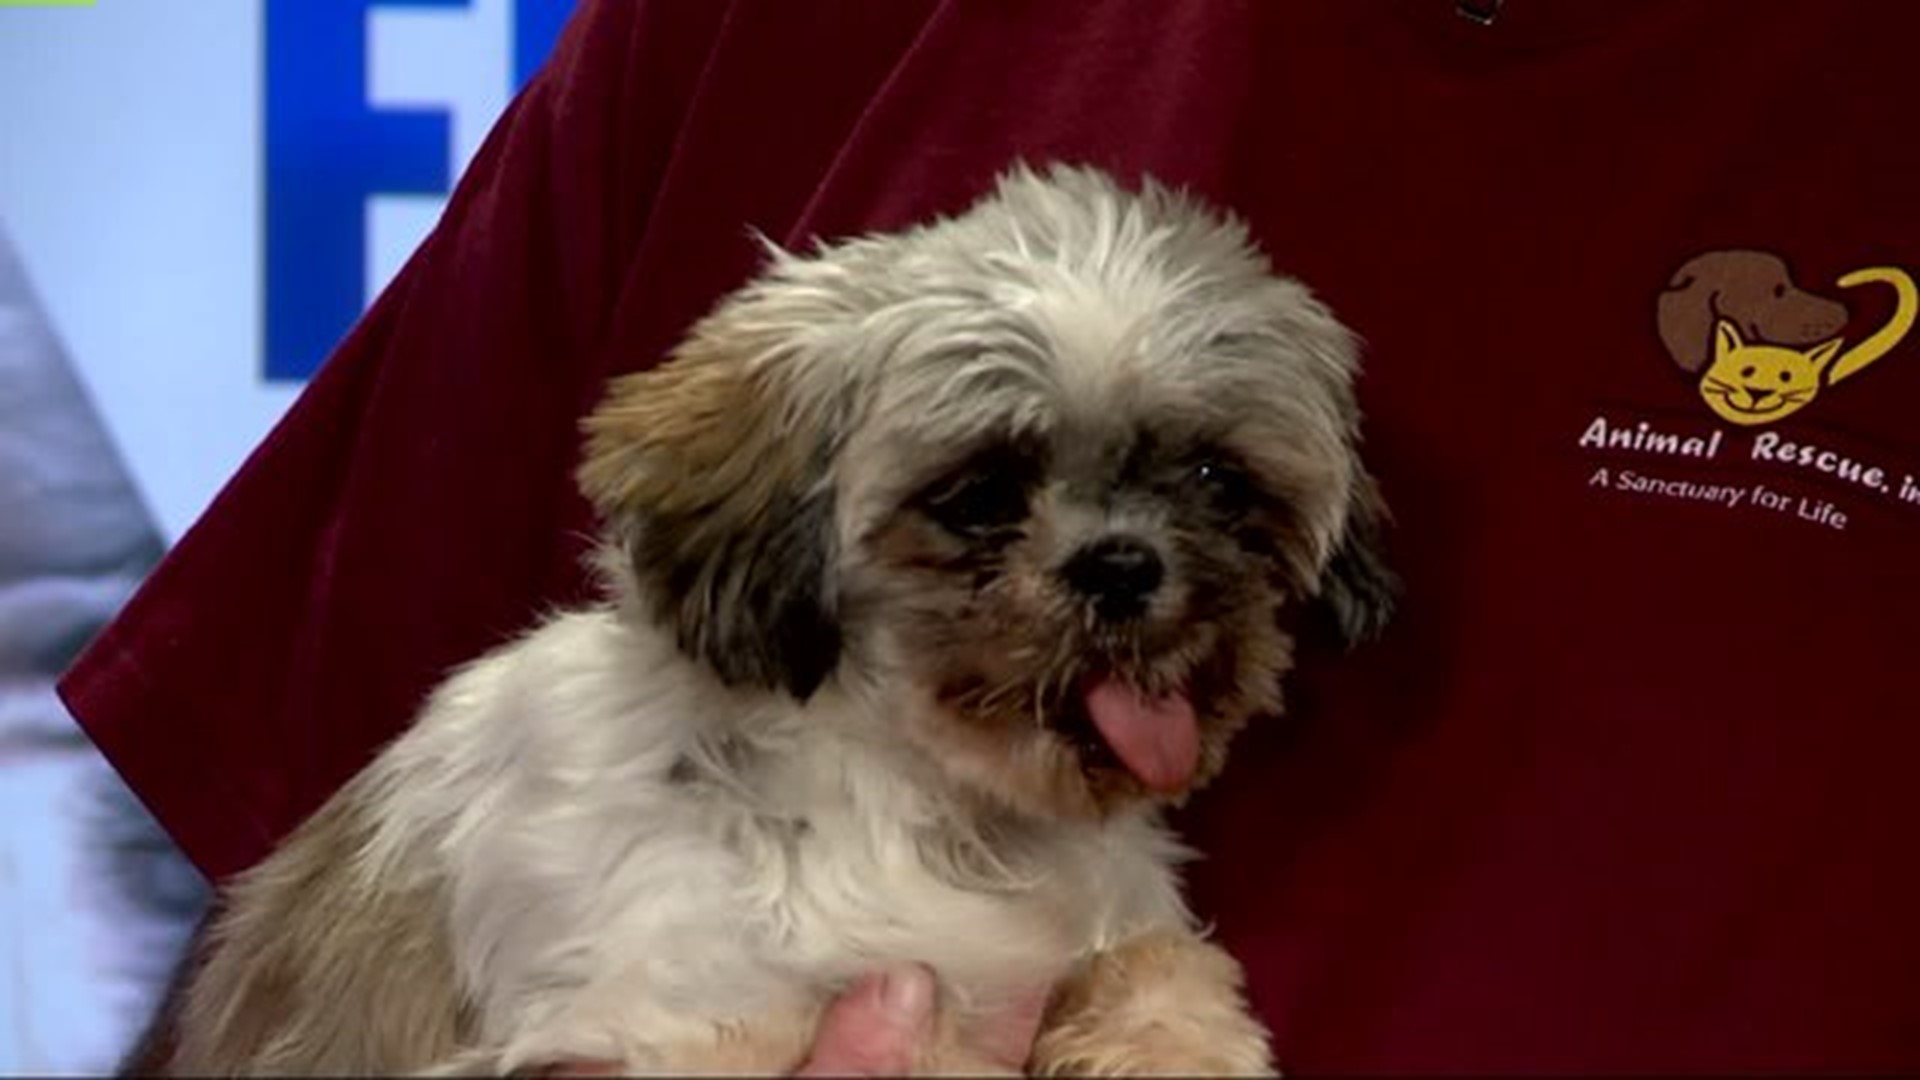 Adopt a Furry Friend from Animal Rescue Inc. in New Freedom